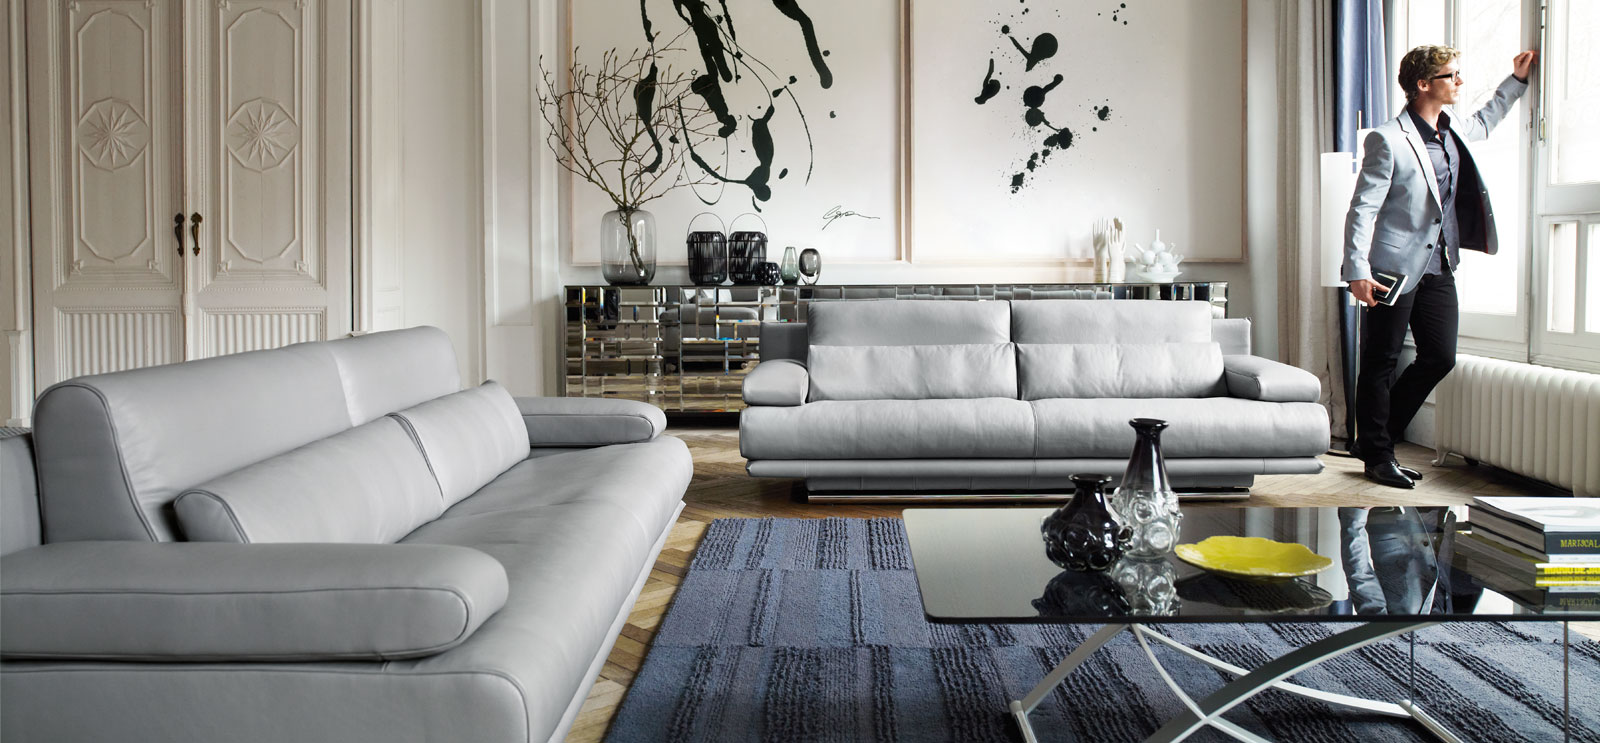 Explore In Rolf Benz – Buy New Furniture With Excellent Leather Work